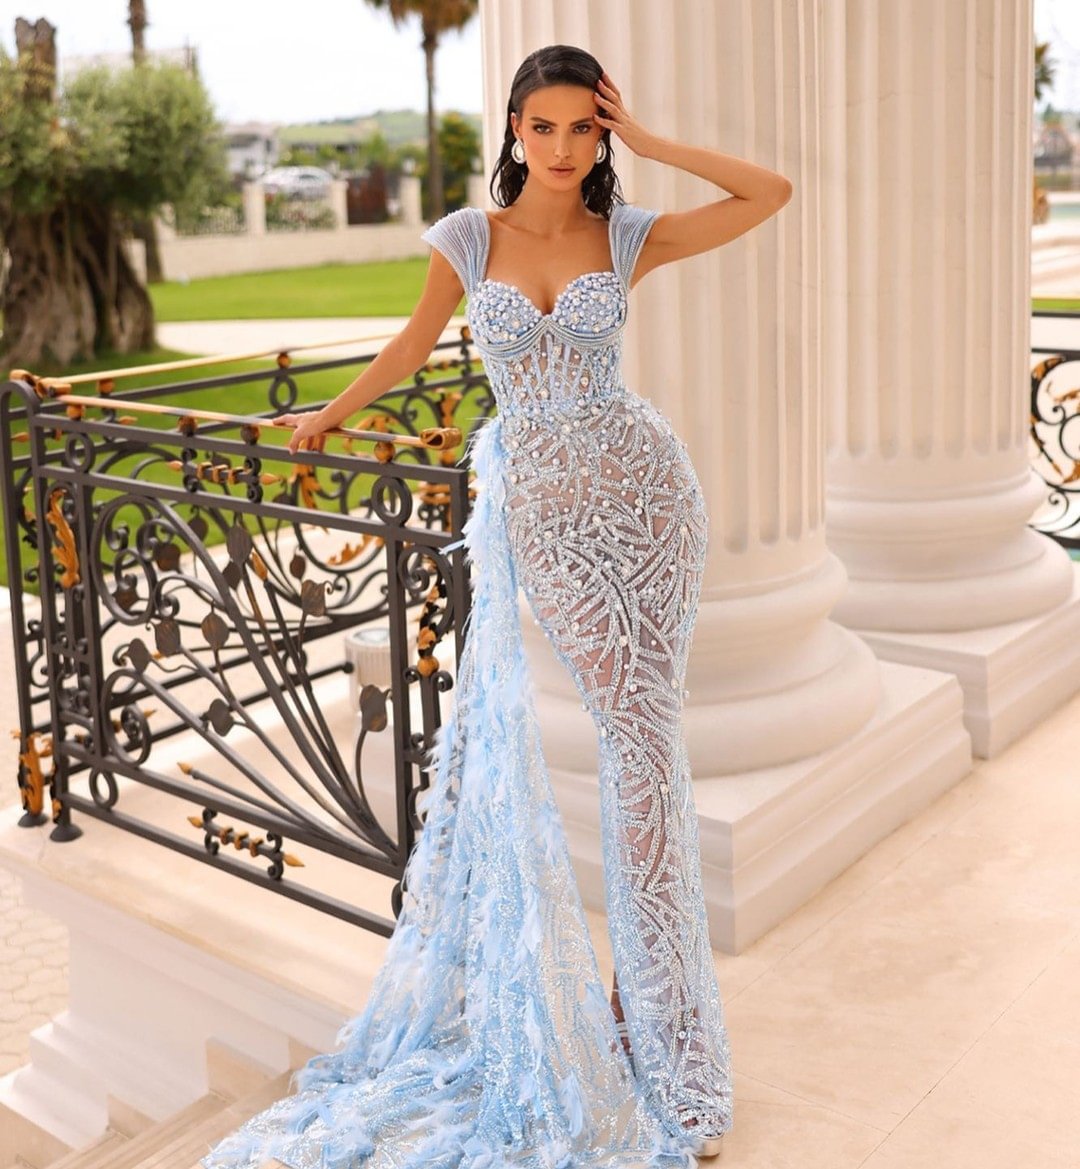 Daisda Stunning Baby Blue Pearl Sleeveless Mermaid Feather Prom Dress Gown